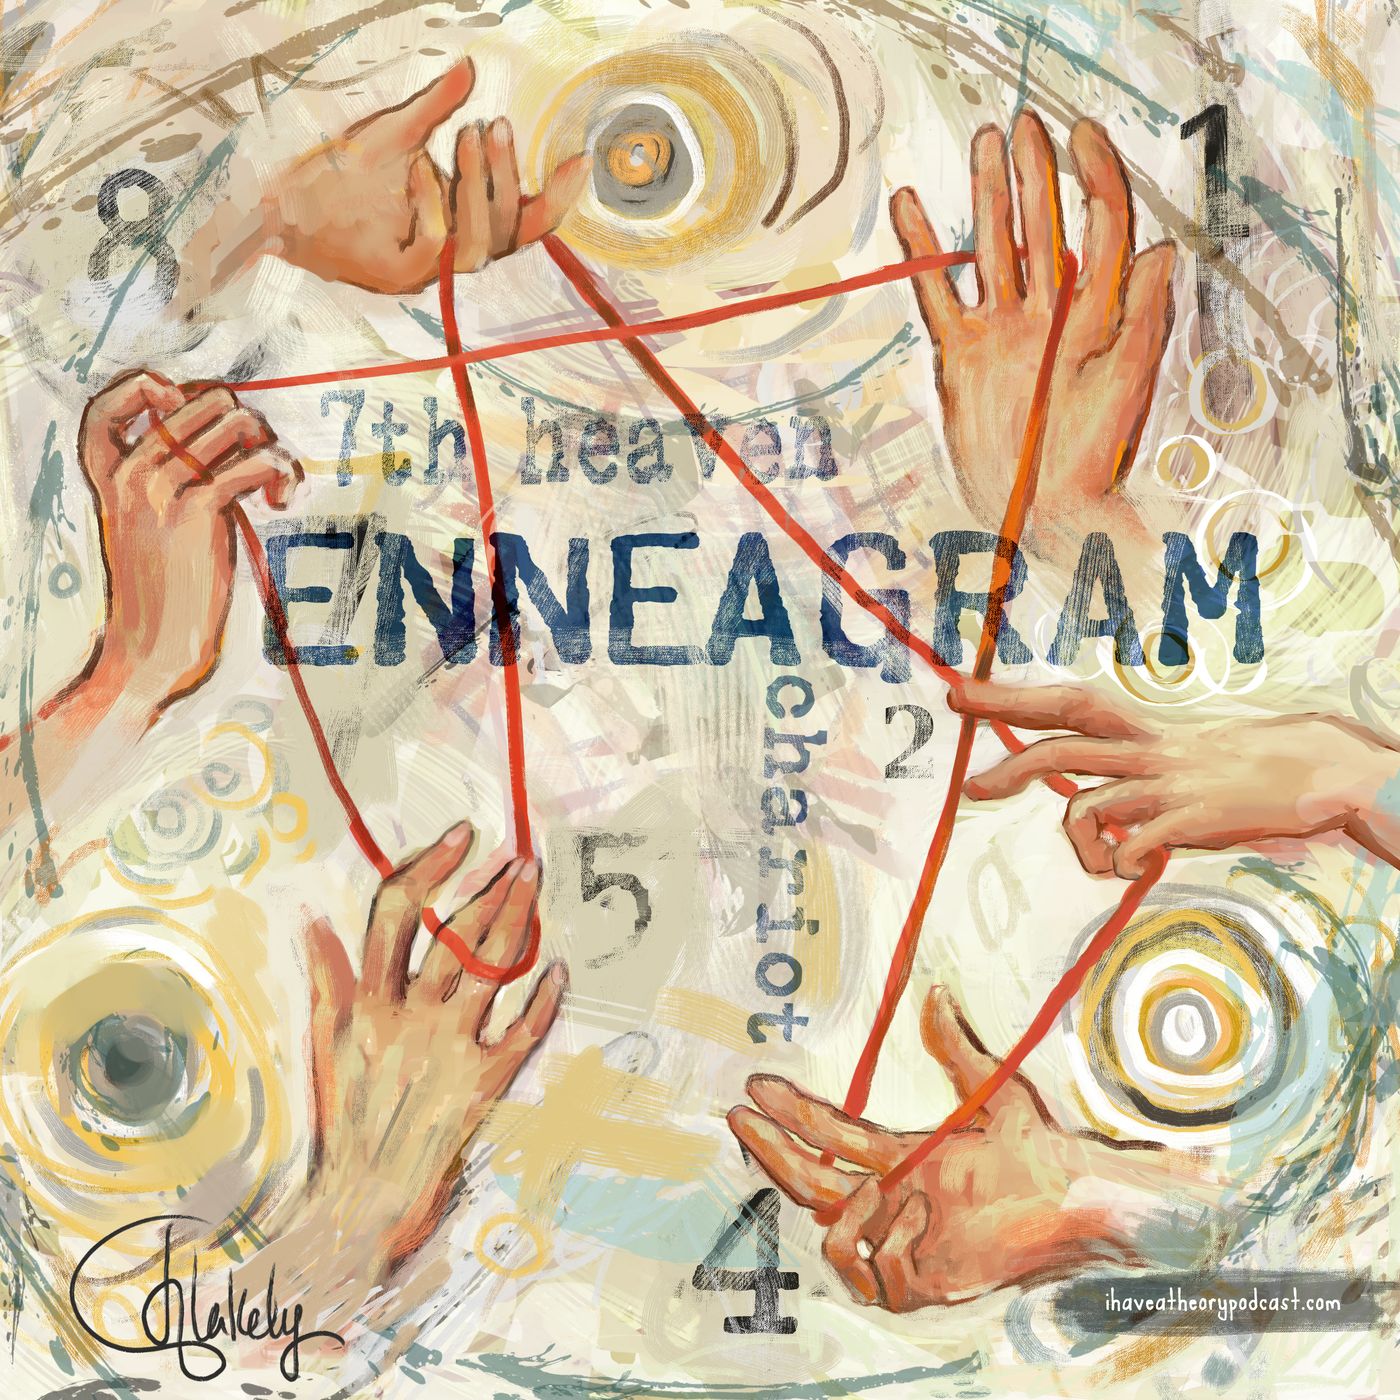 Enneagrams, Chariots and 7th Heaven